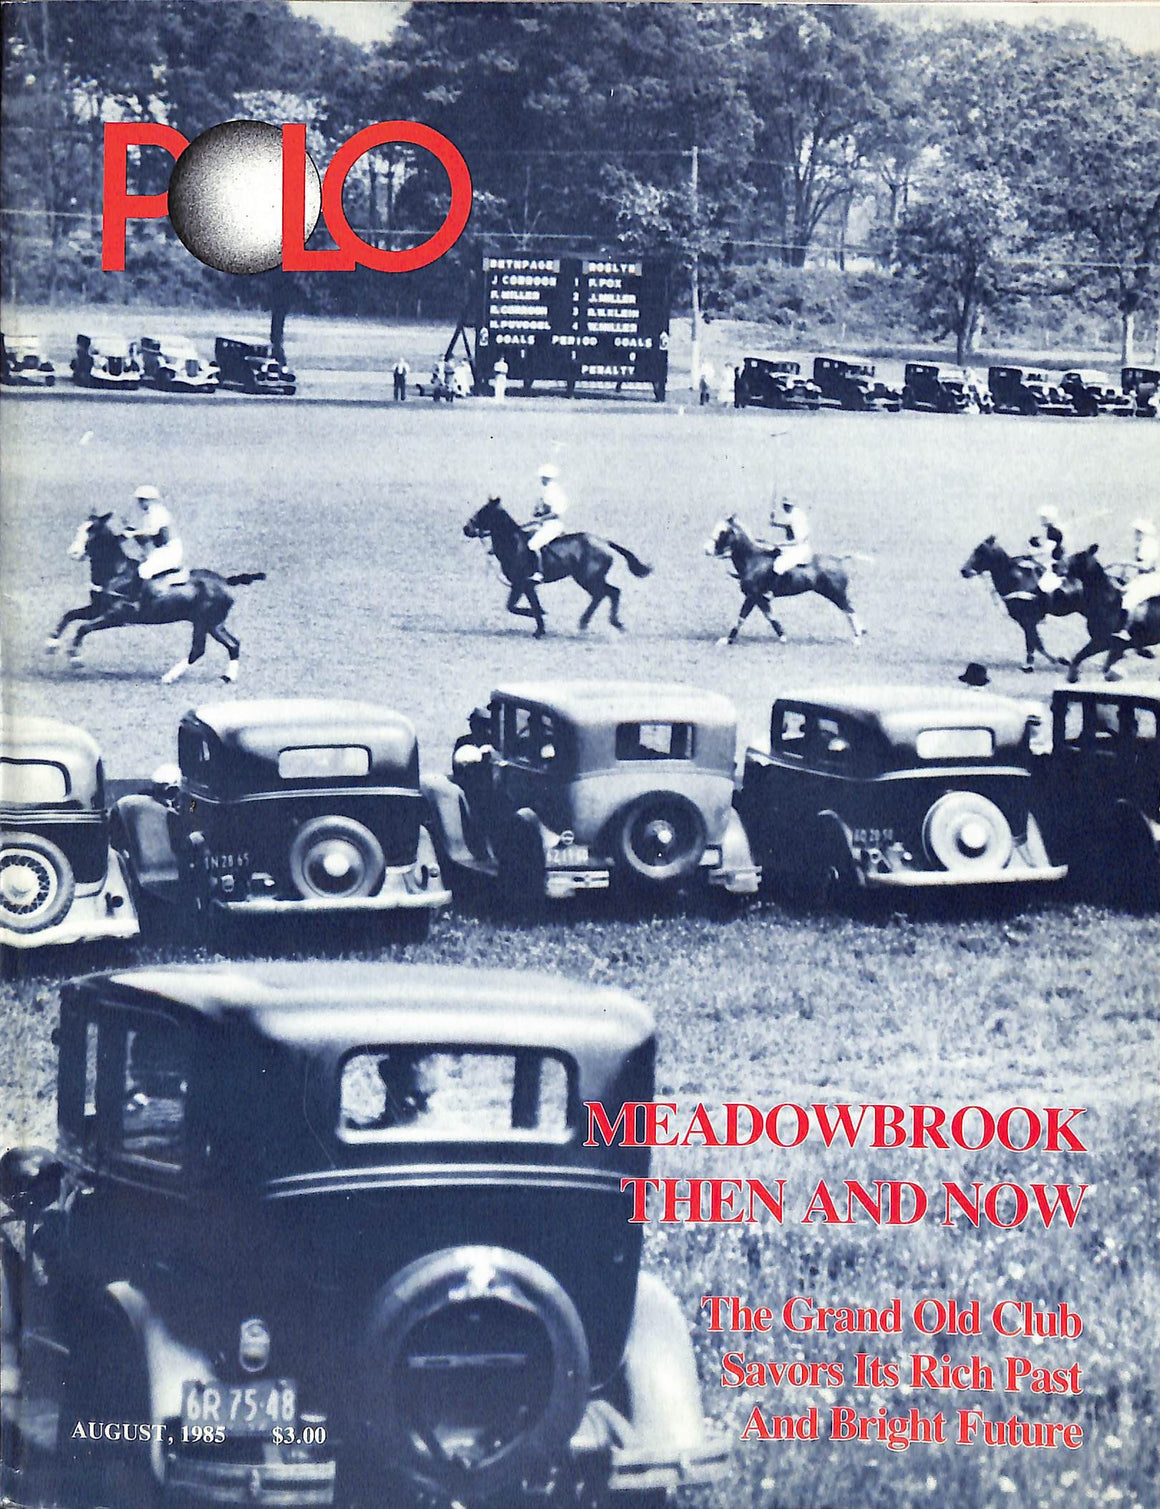 "Polo Magazine August, 1985 Meadowbrook Then and Now"